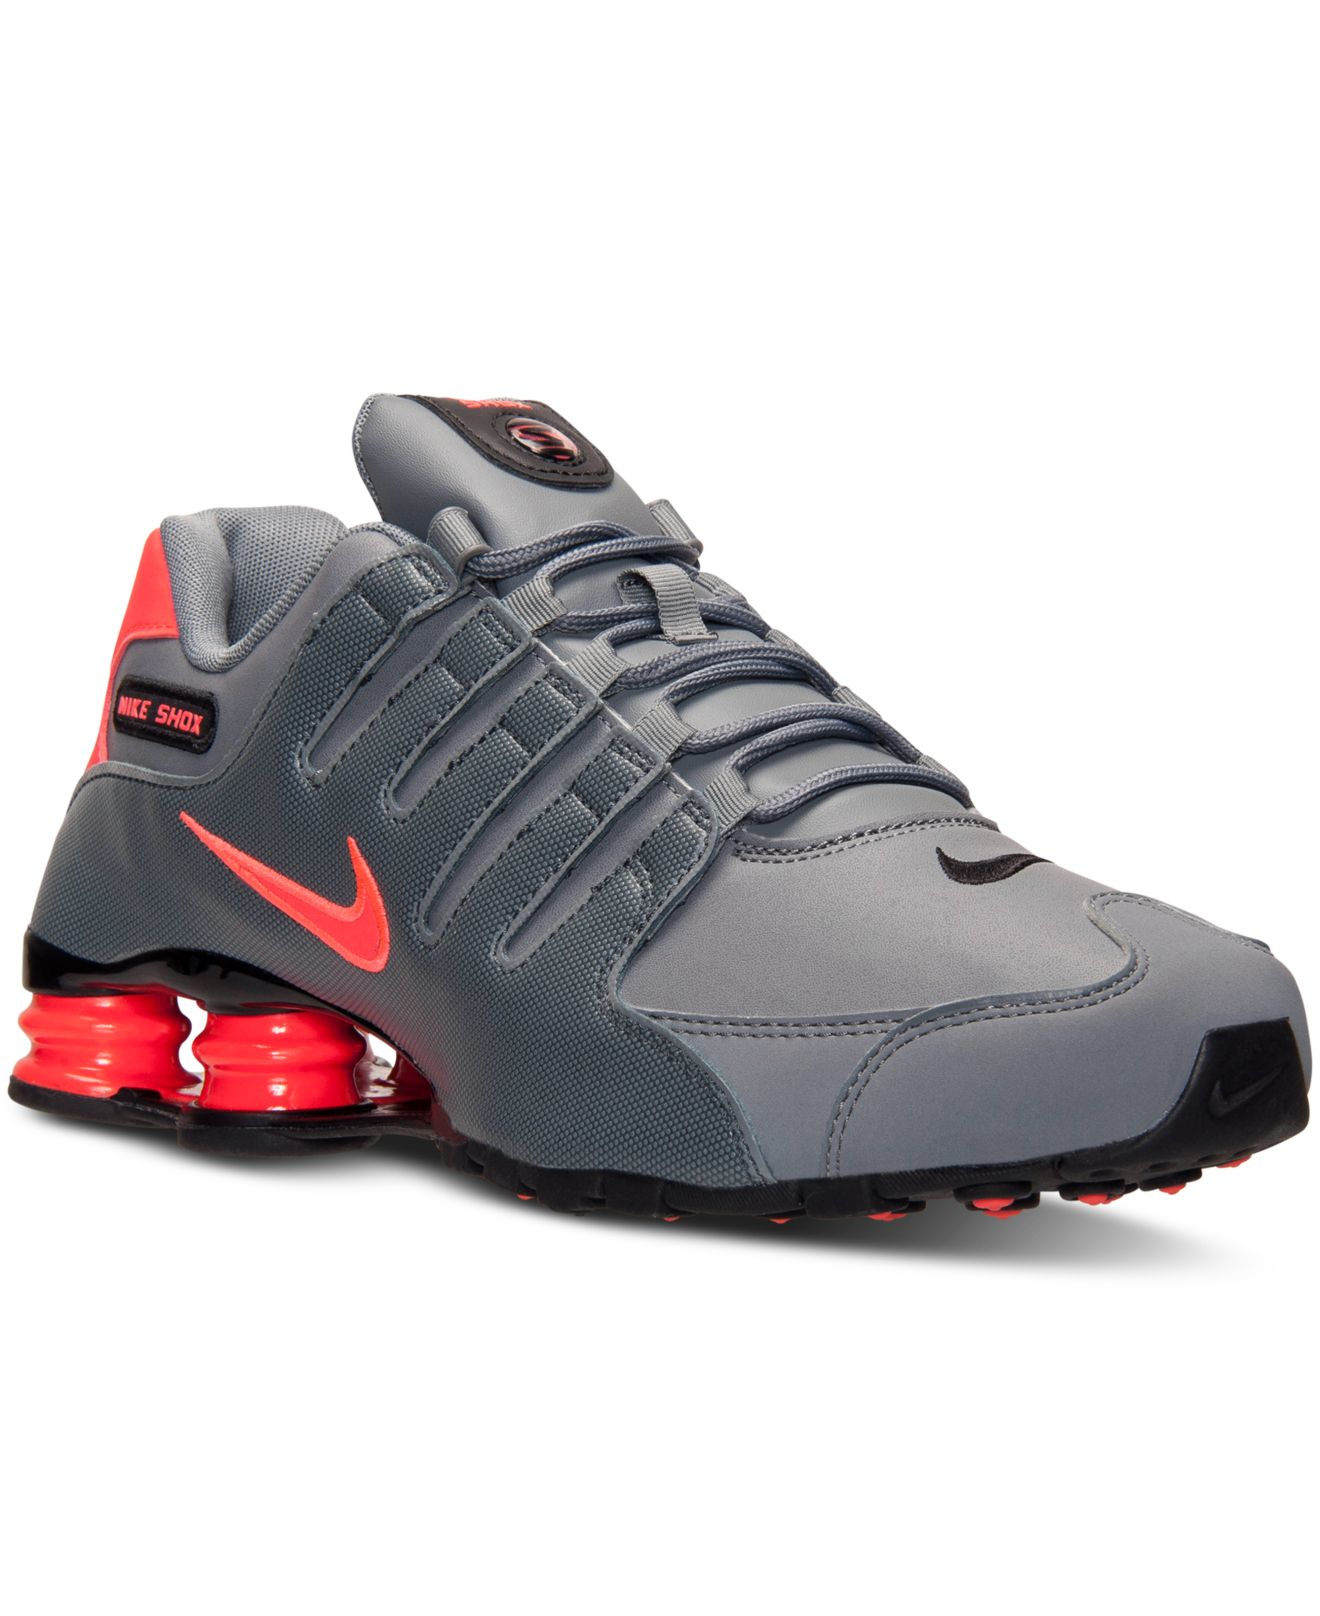 Lyst - Nike Men's Shox Nz Running Sneakers From Finish Line in White ...